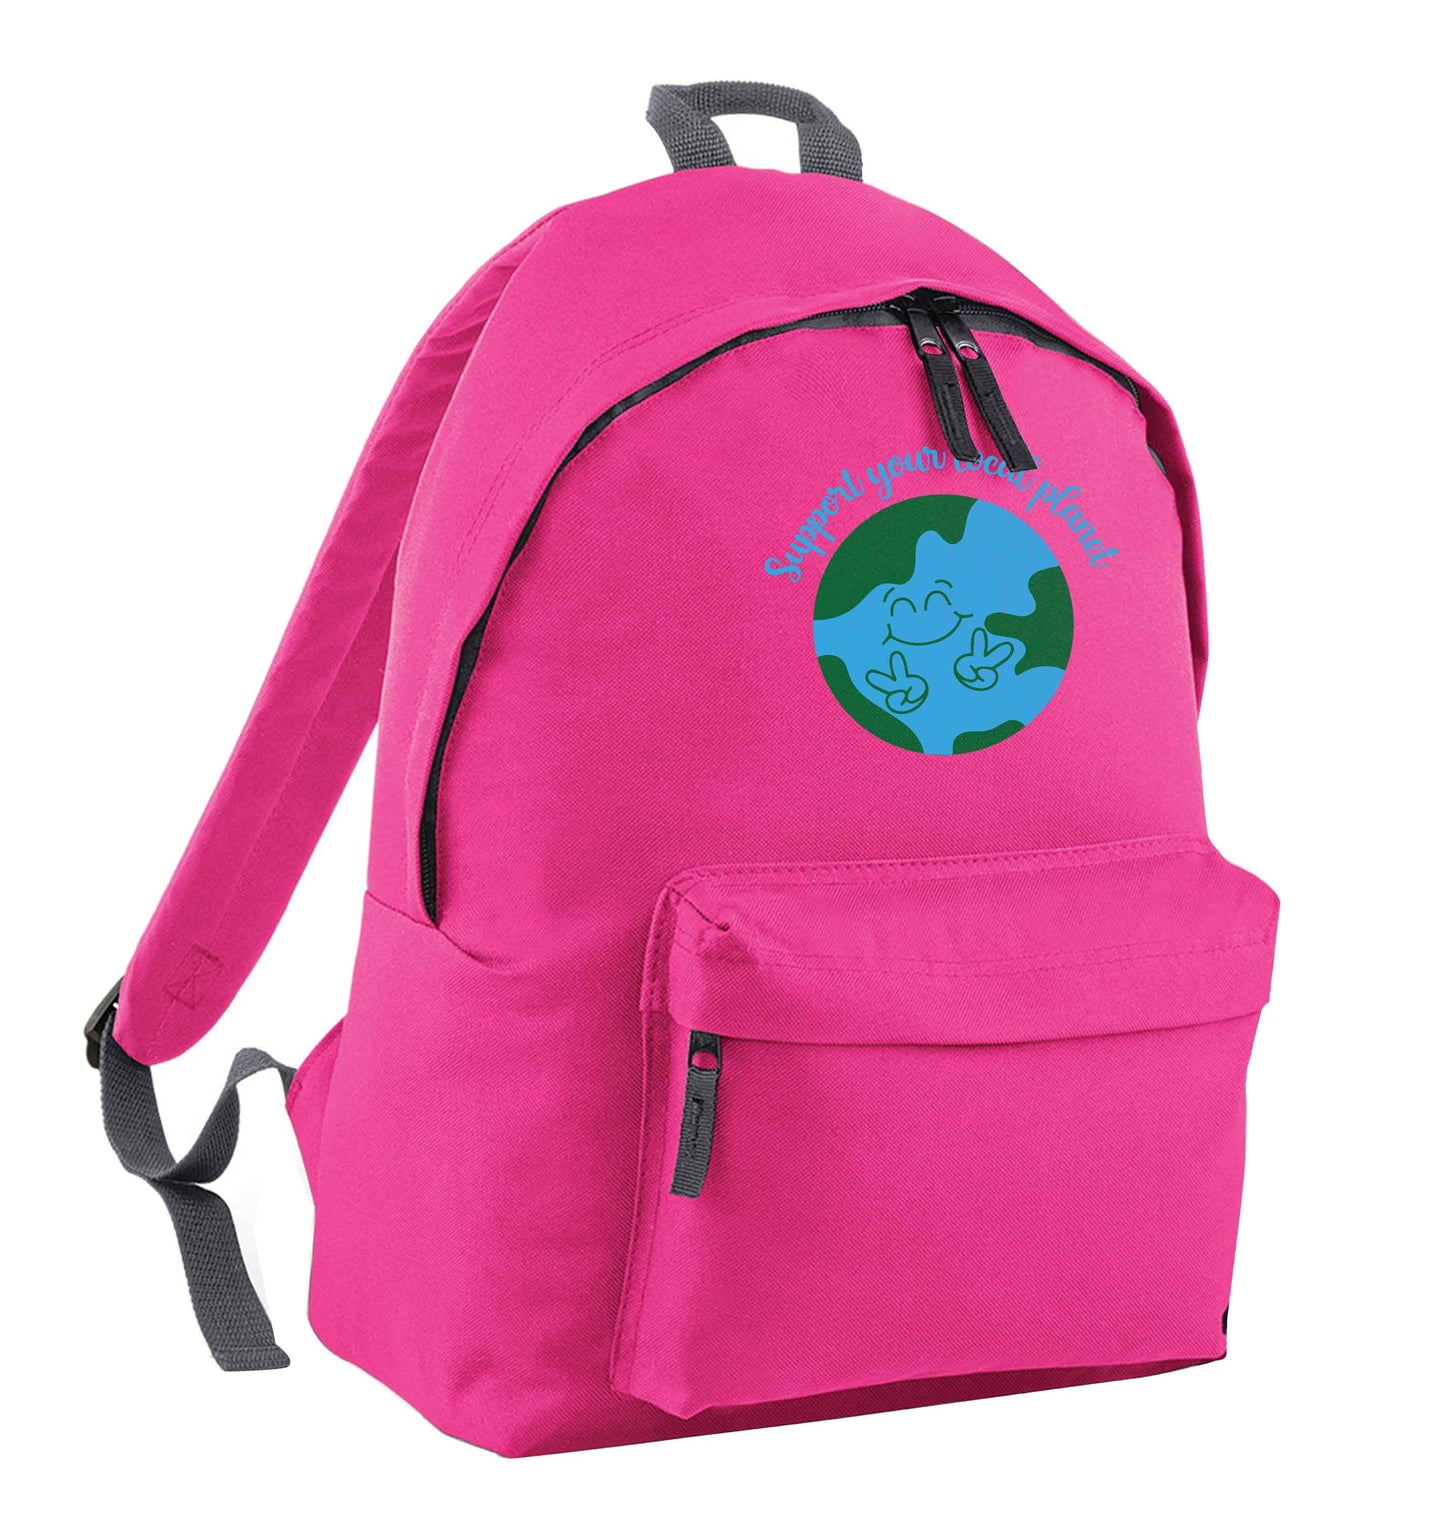 Support your local planet pink children's backpack